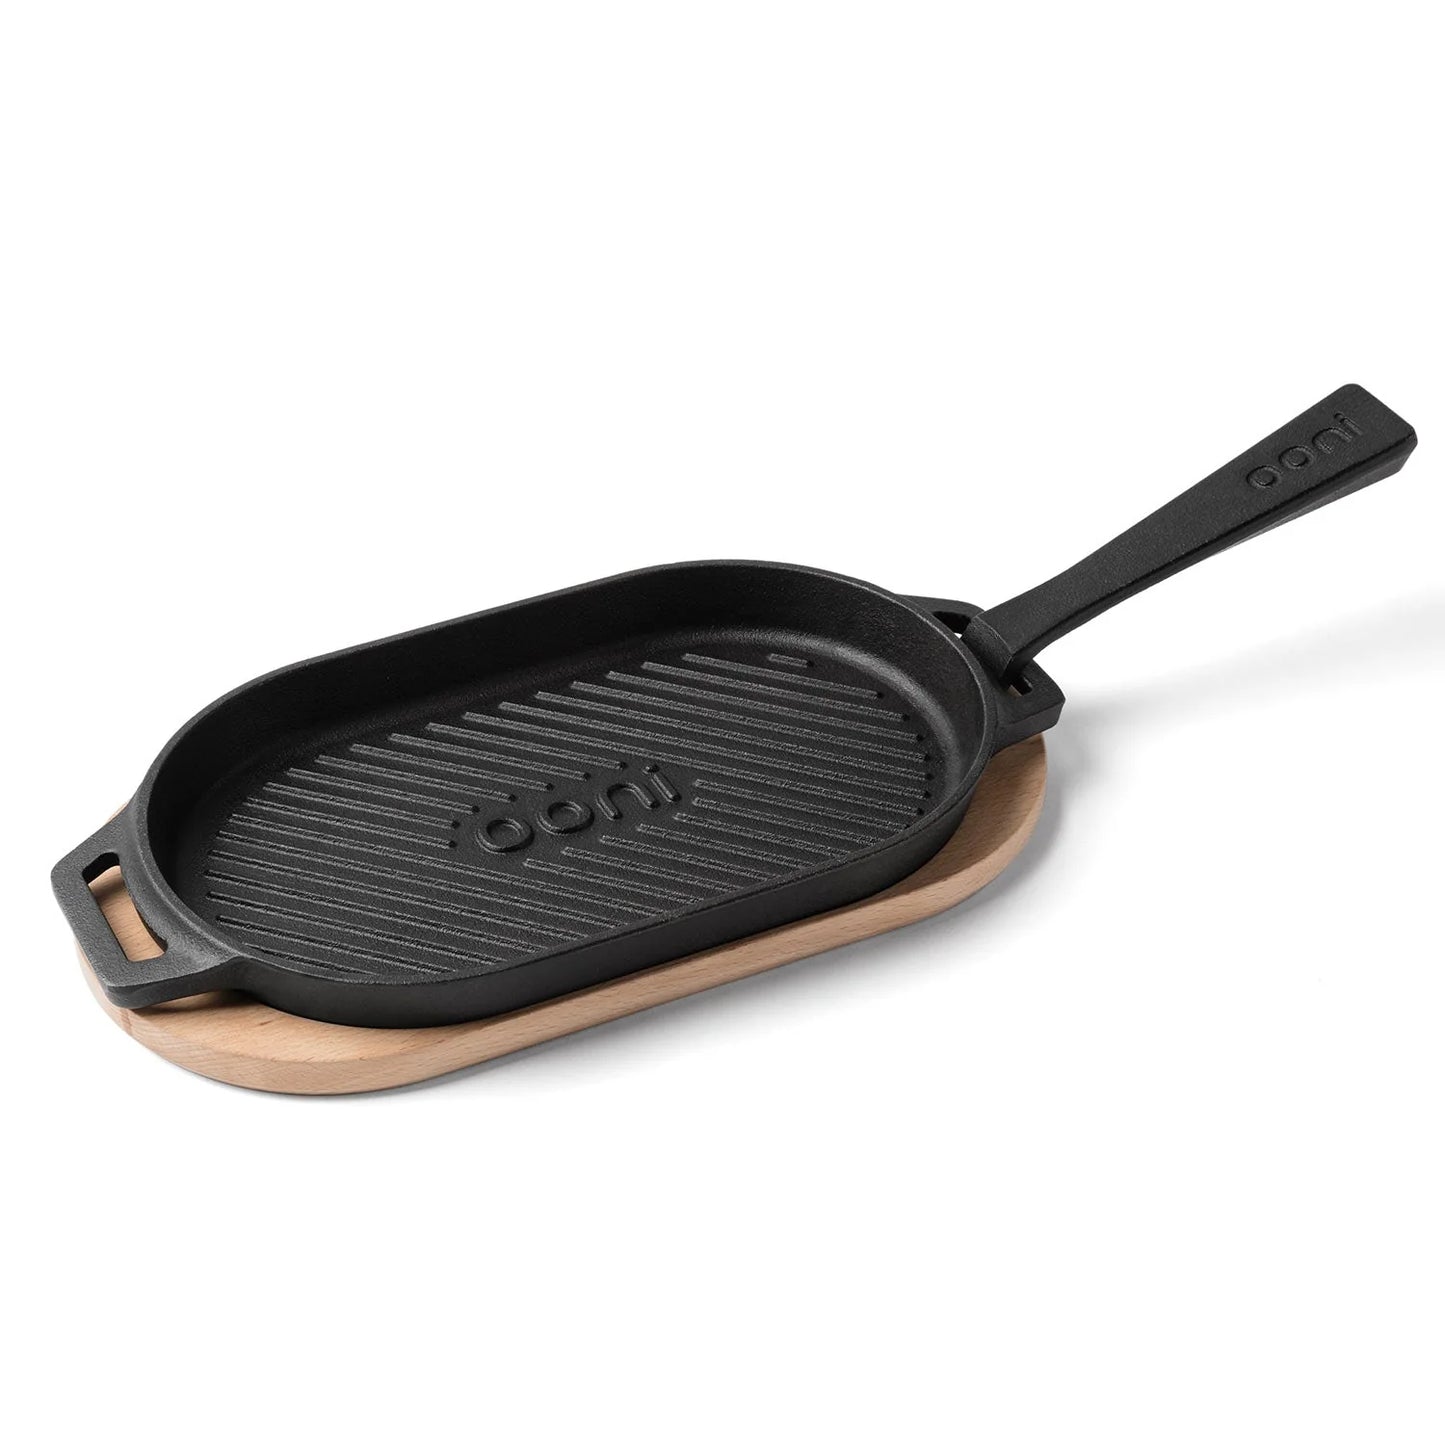 Ooni Grizzler Pan - Cast Iron